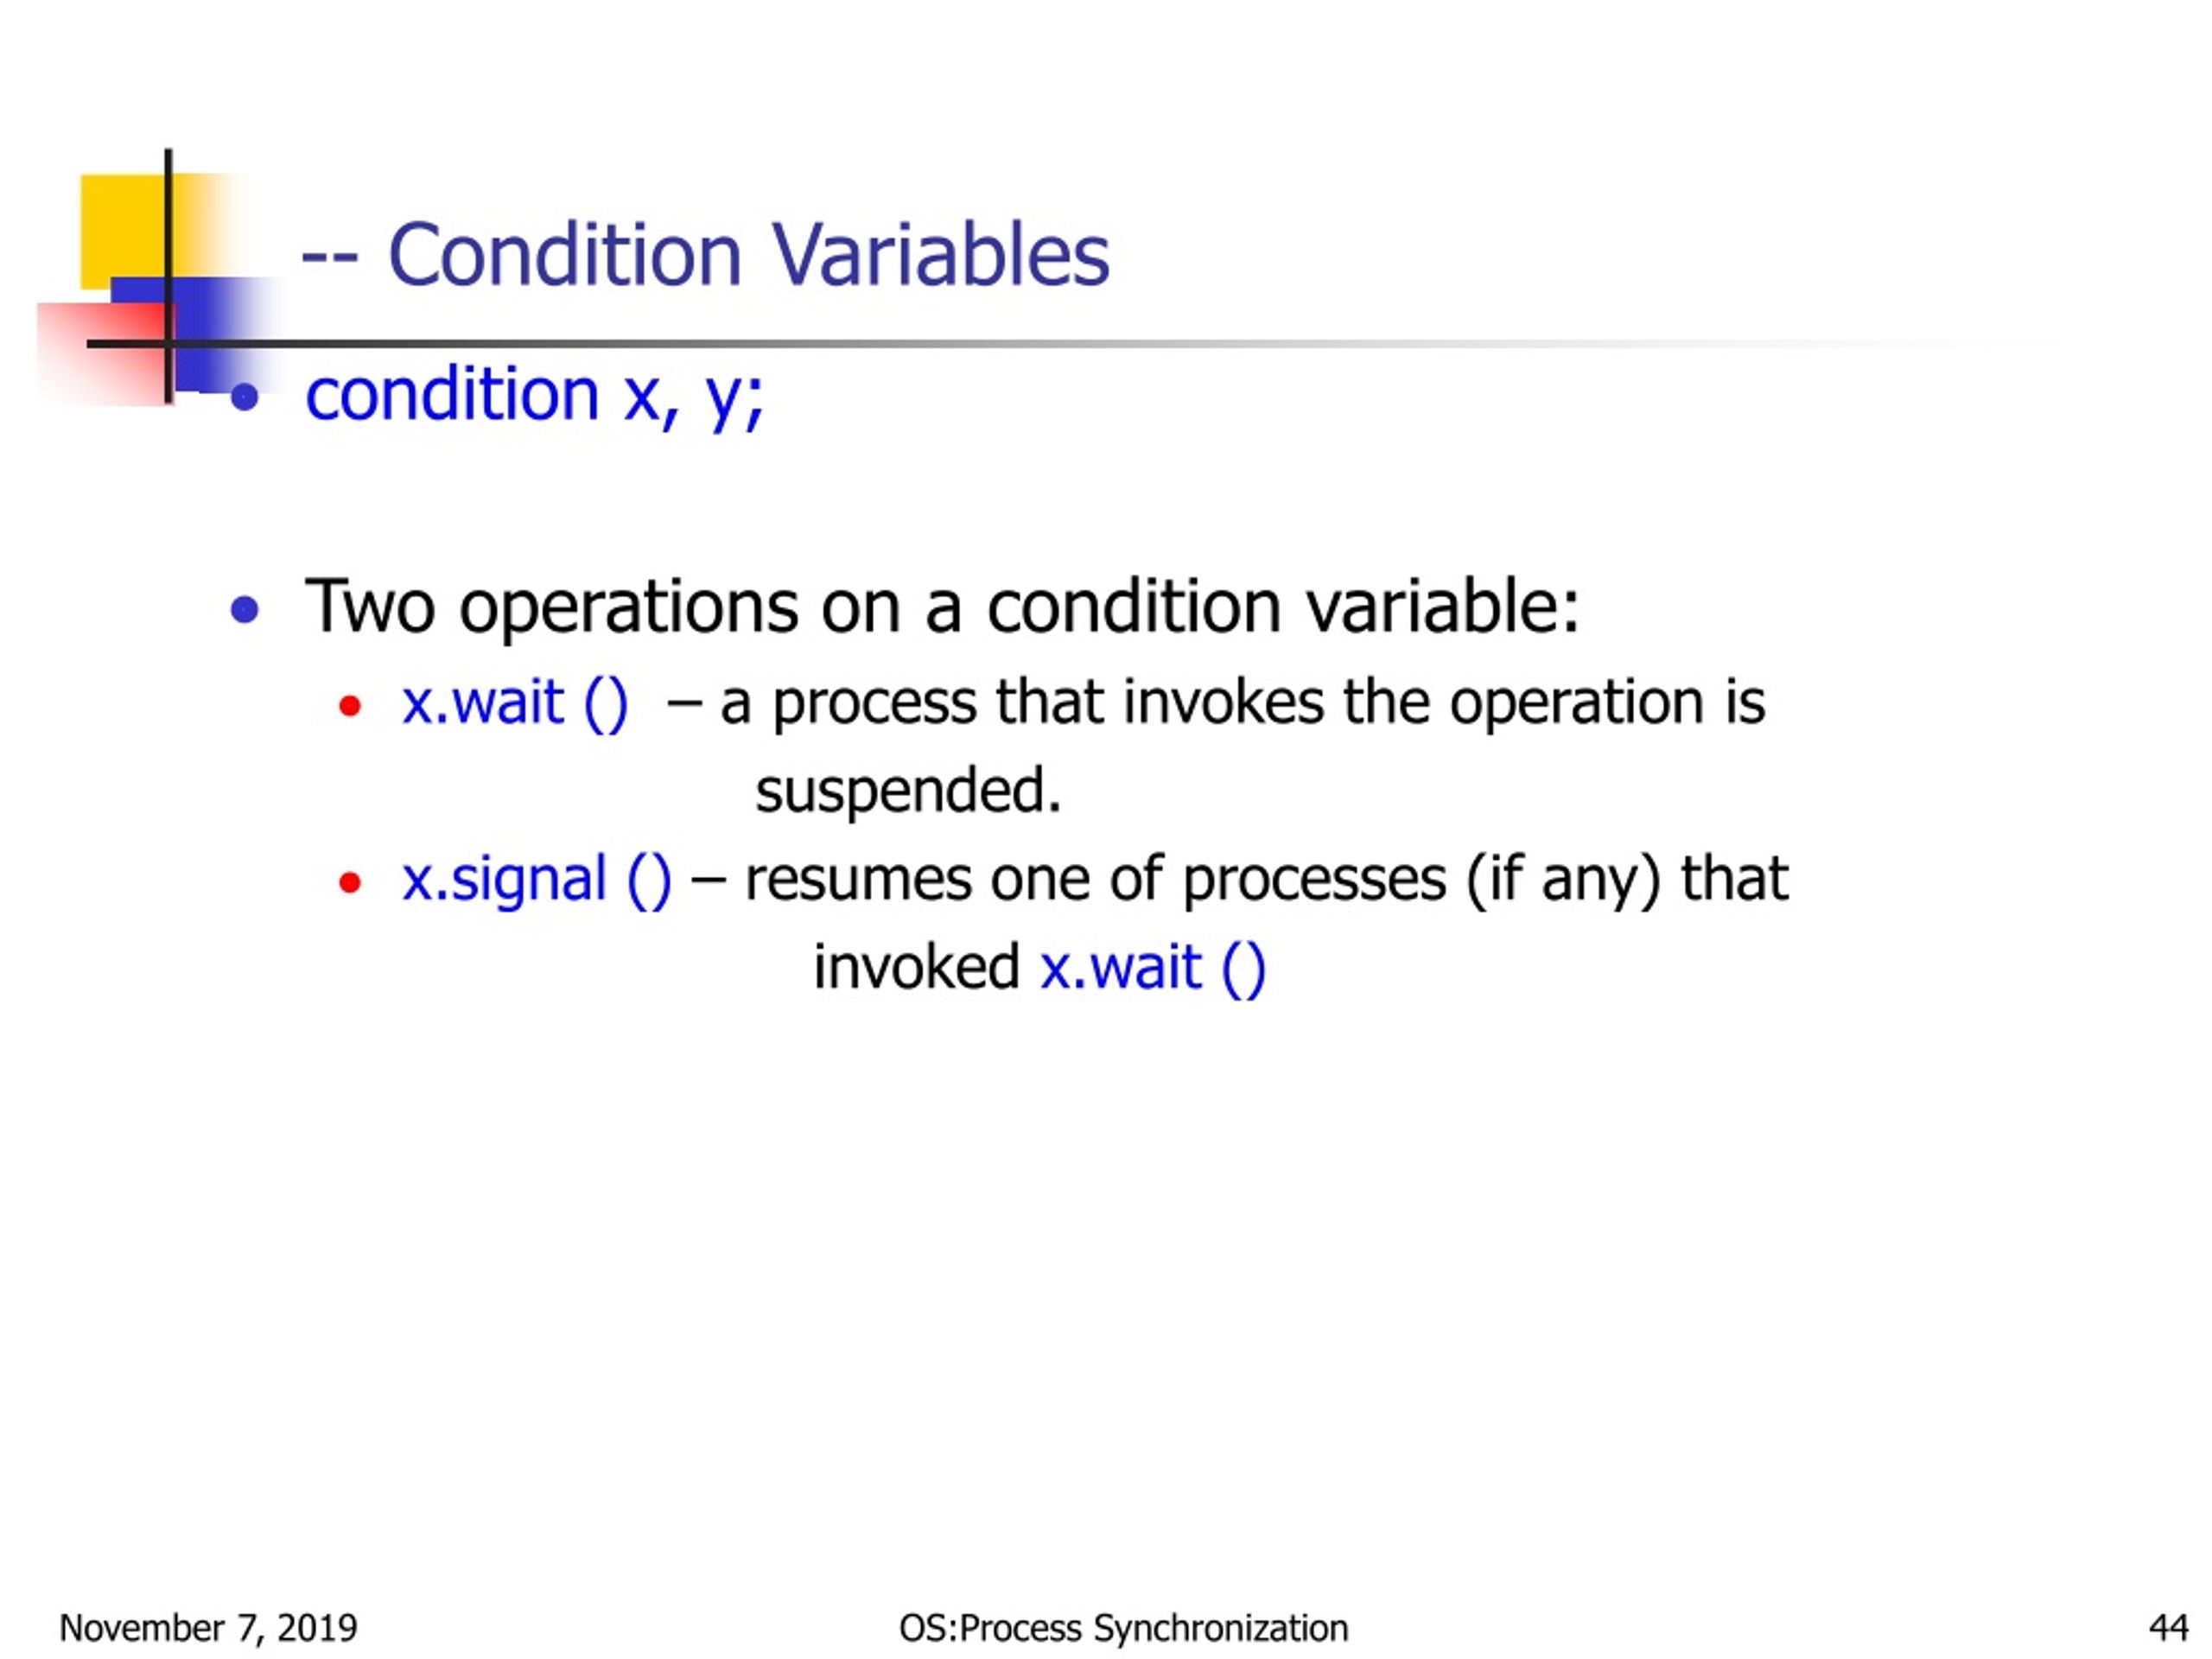 Condition variable